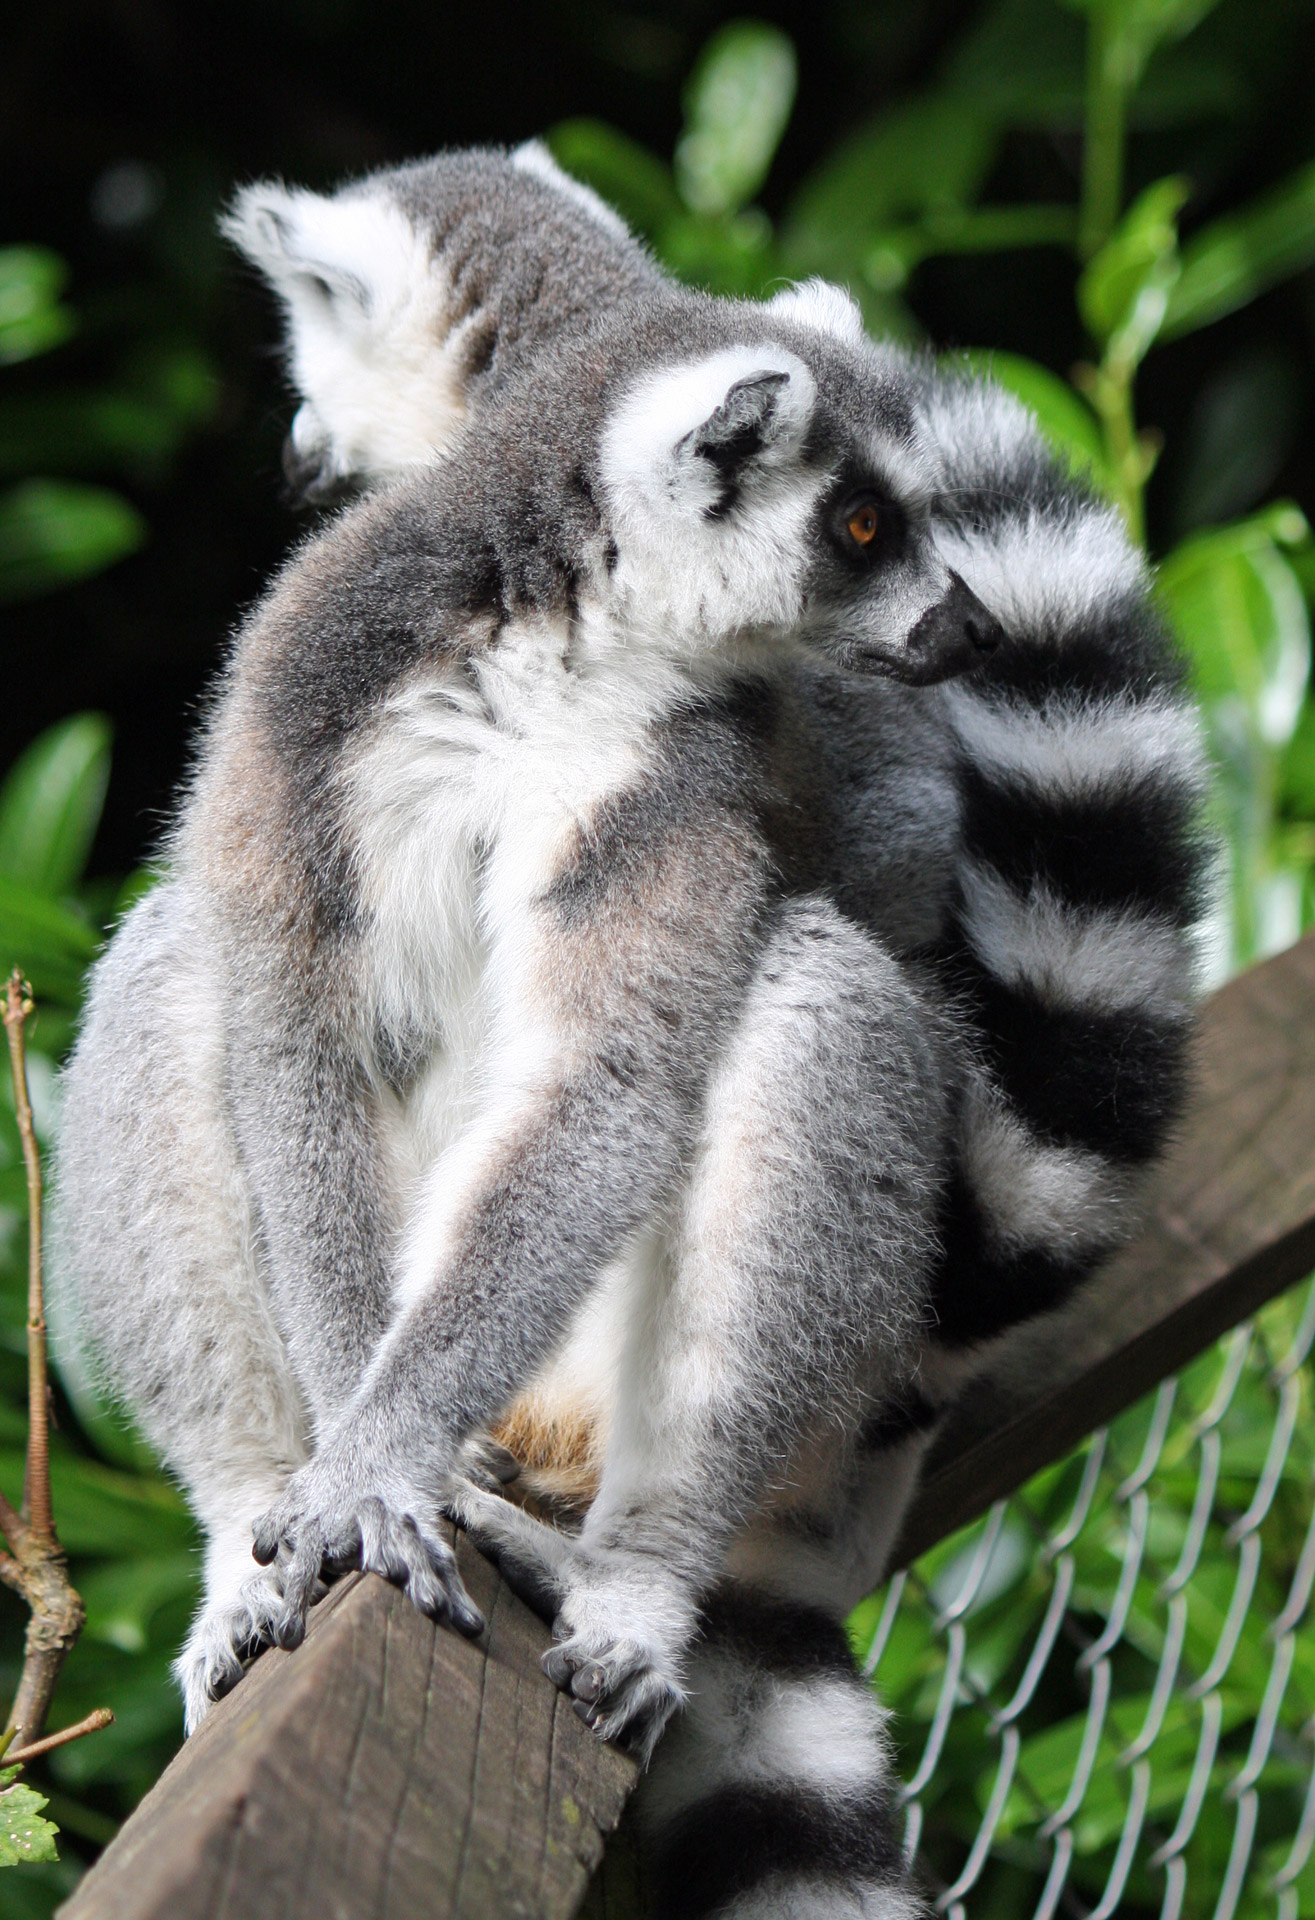 Close-up portrait of a cute ring-tailed lemur